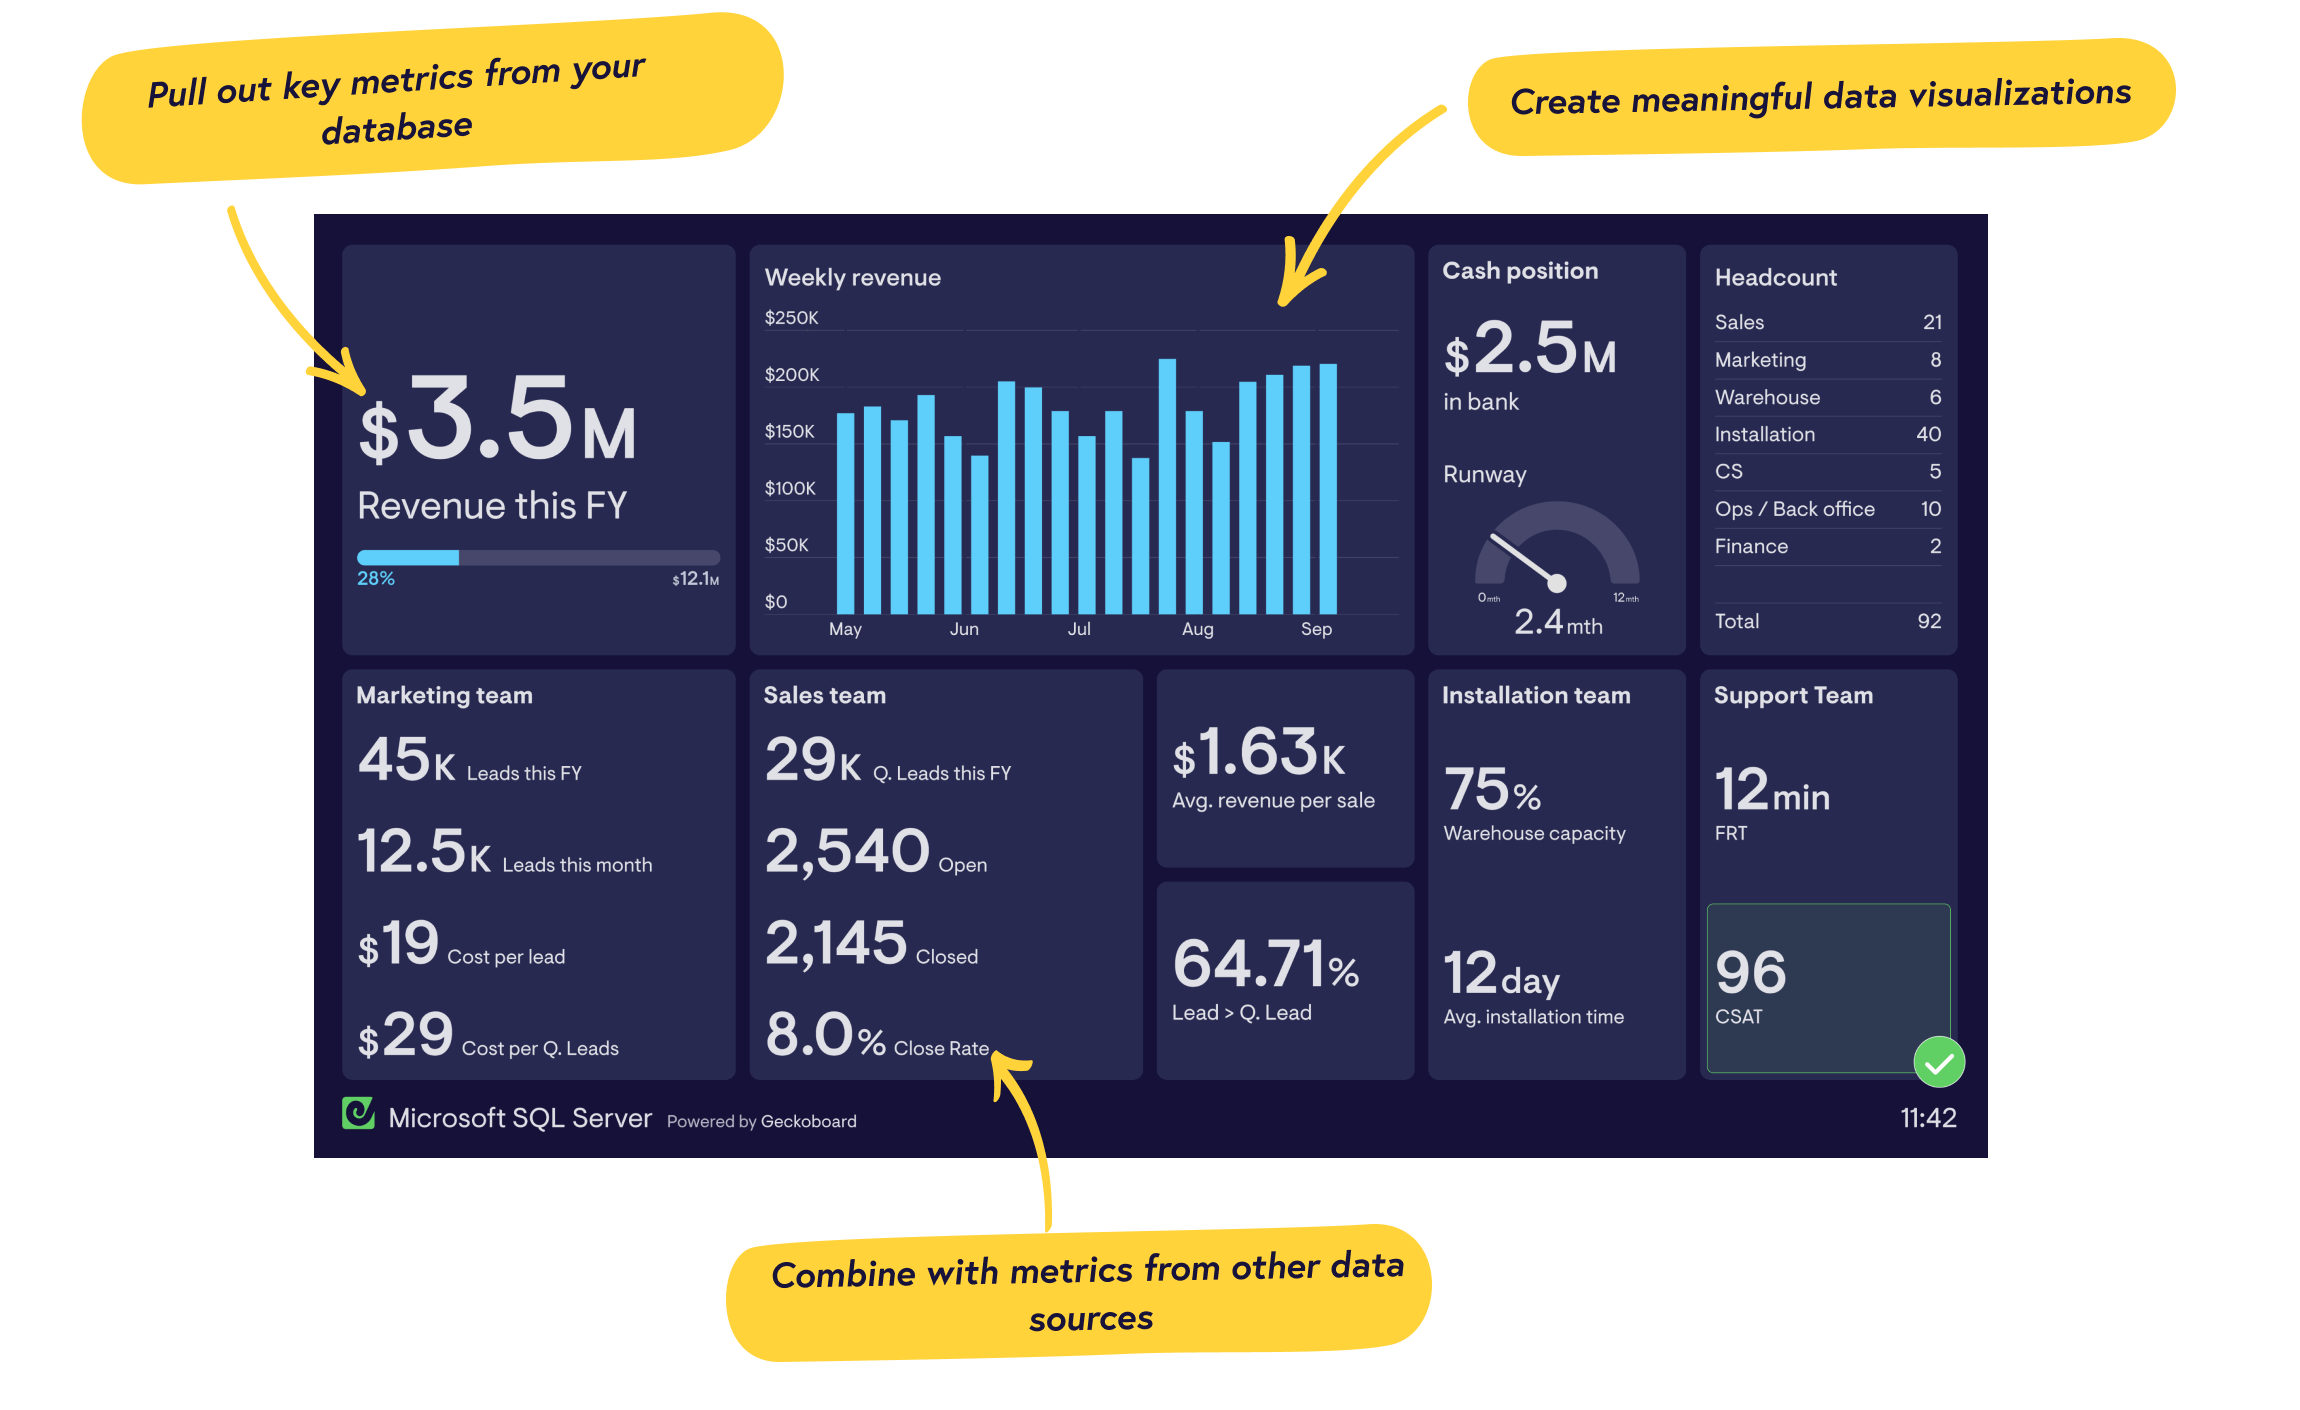 Real-time Microsoft SQL Server dashboards from Geckoboard